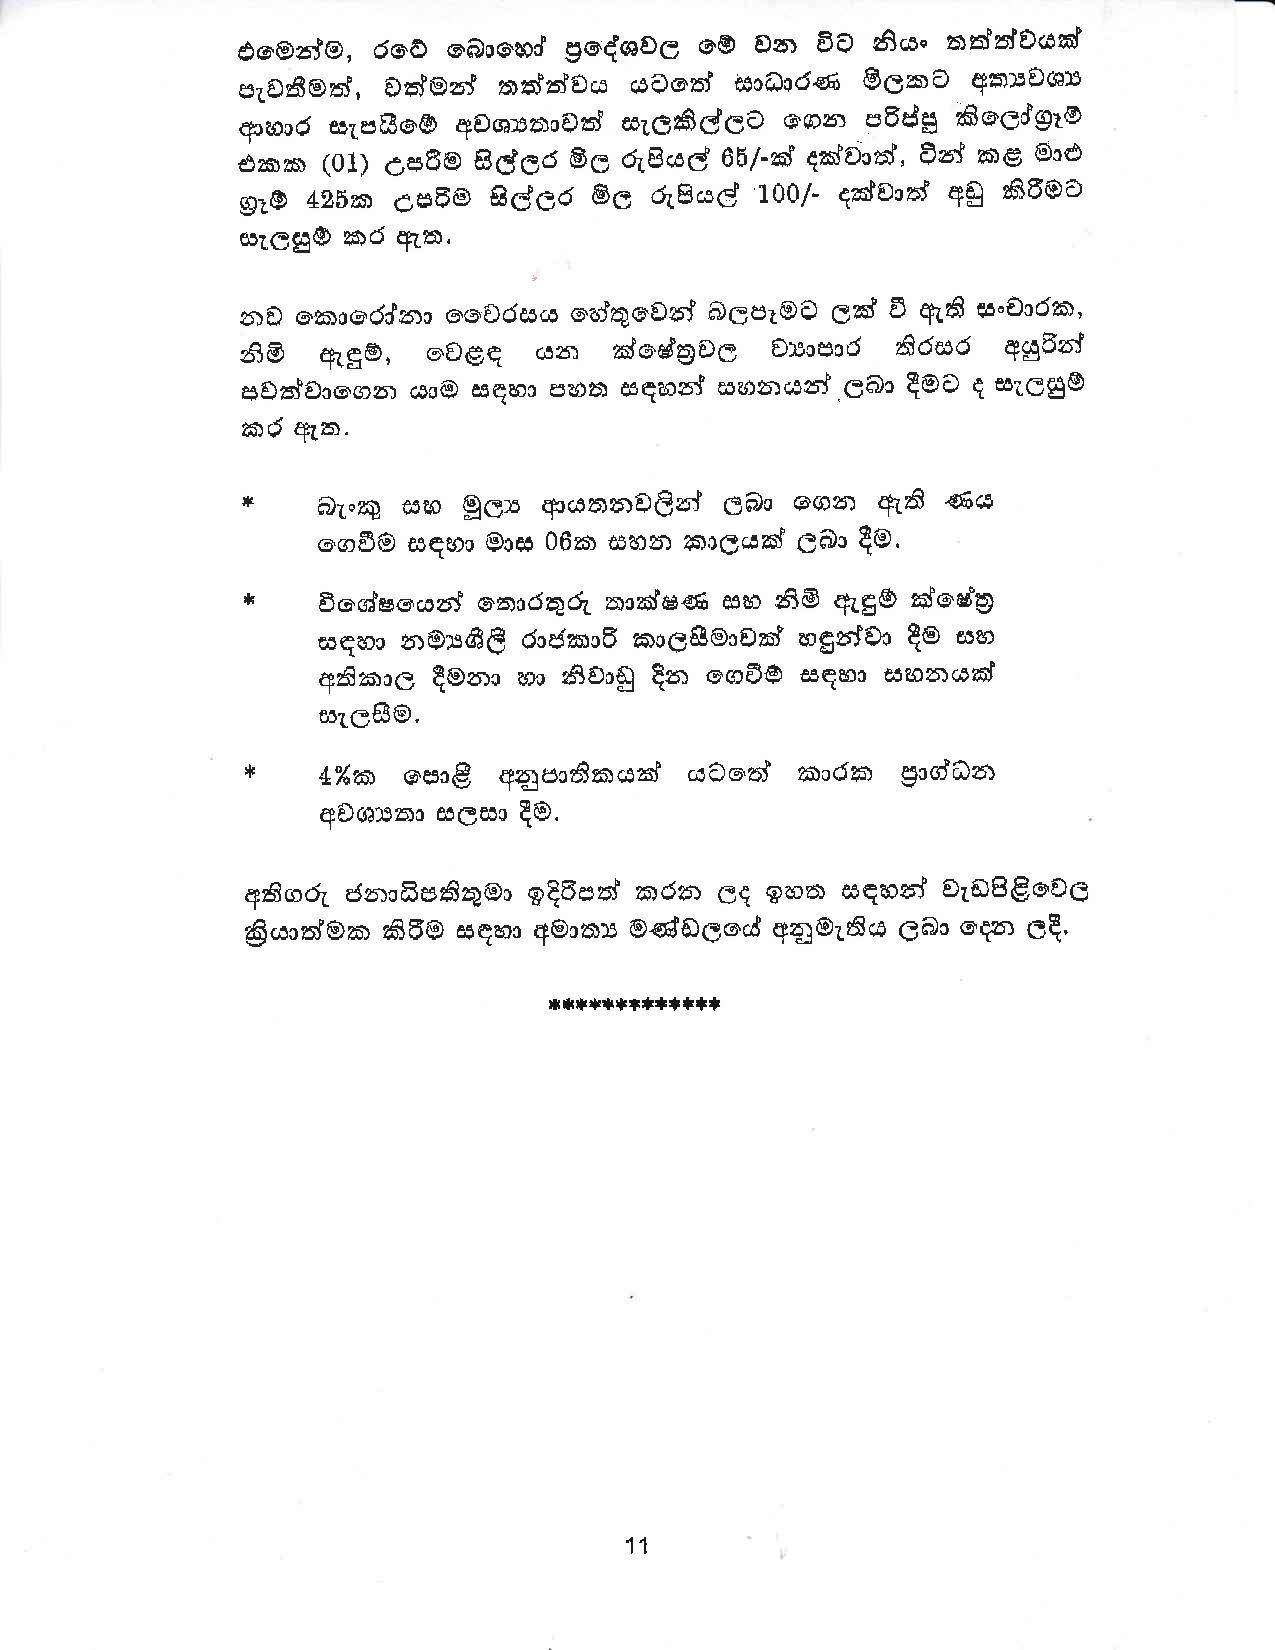 Cabinet Decision on sinhala 18.03.2020 page 011